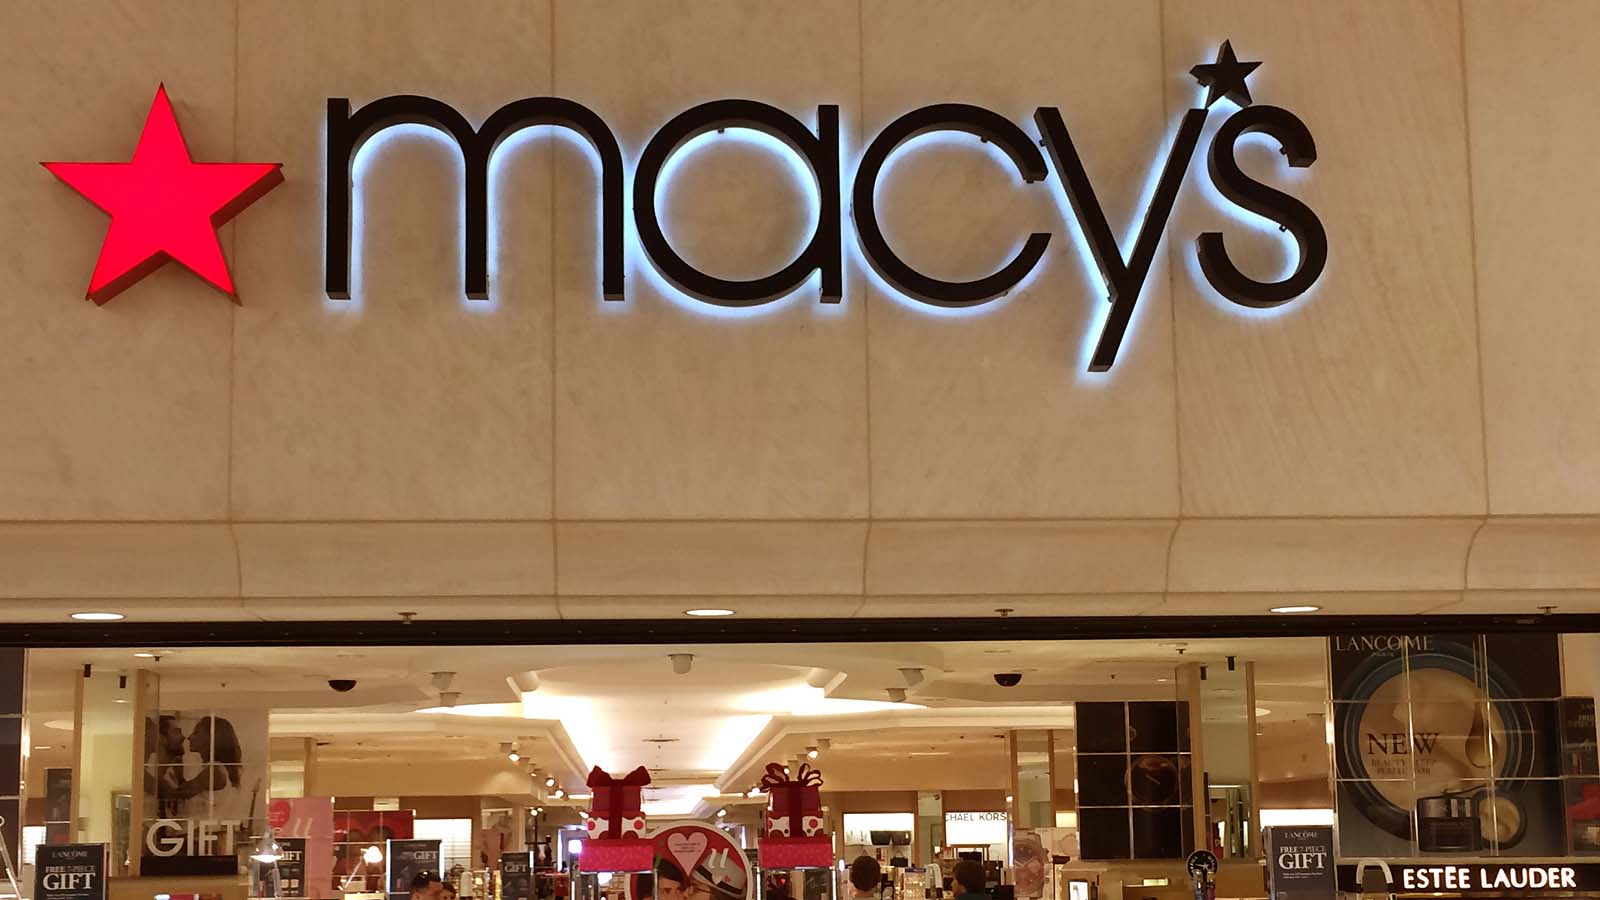 Investors raise bid for Macy's by 14% after earlier rebuff